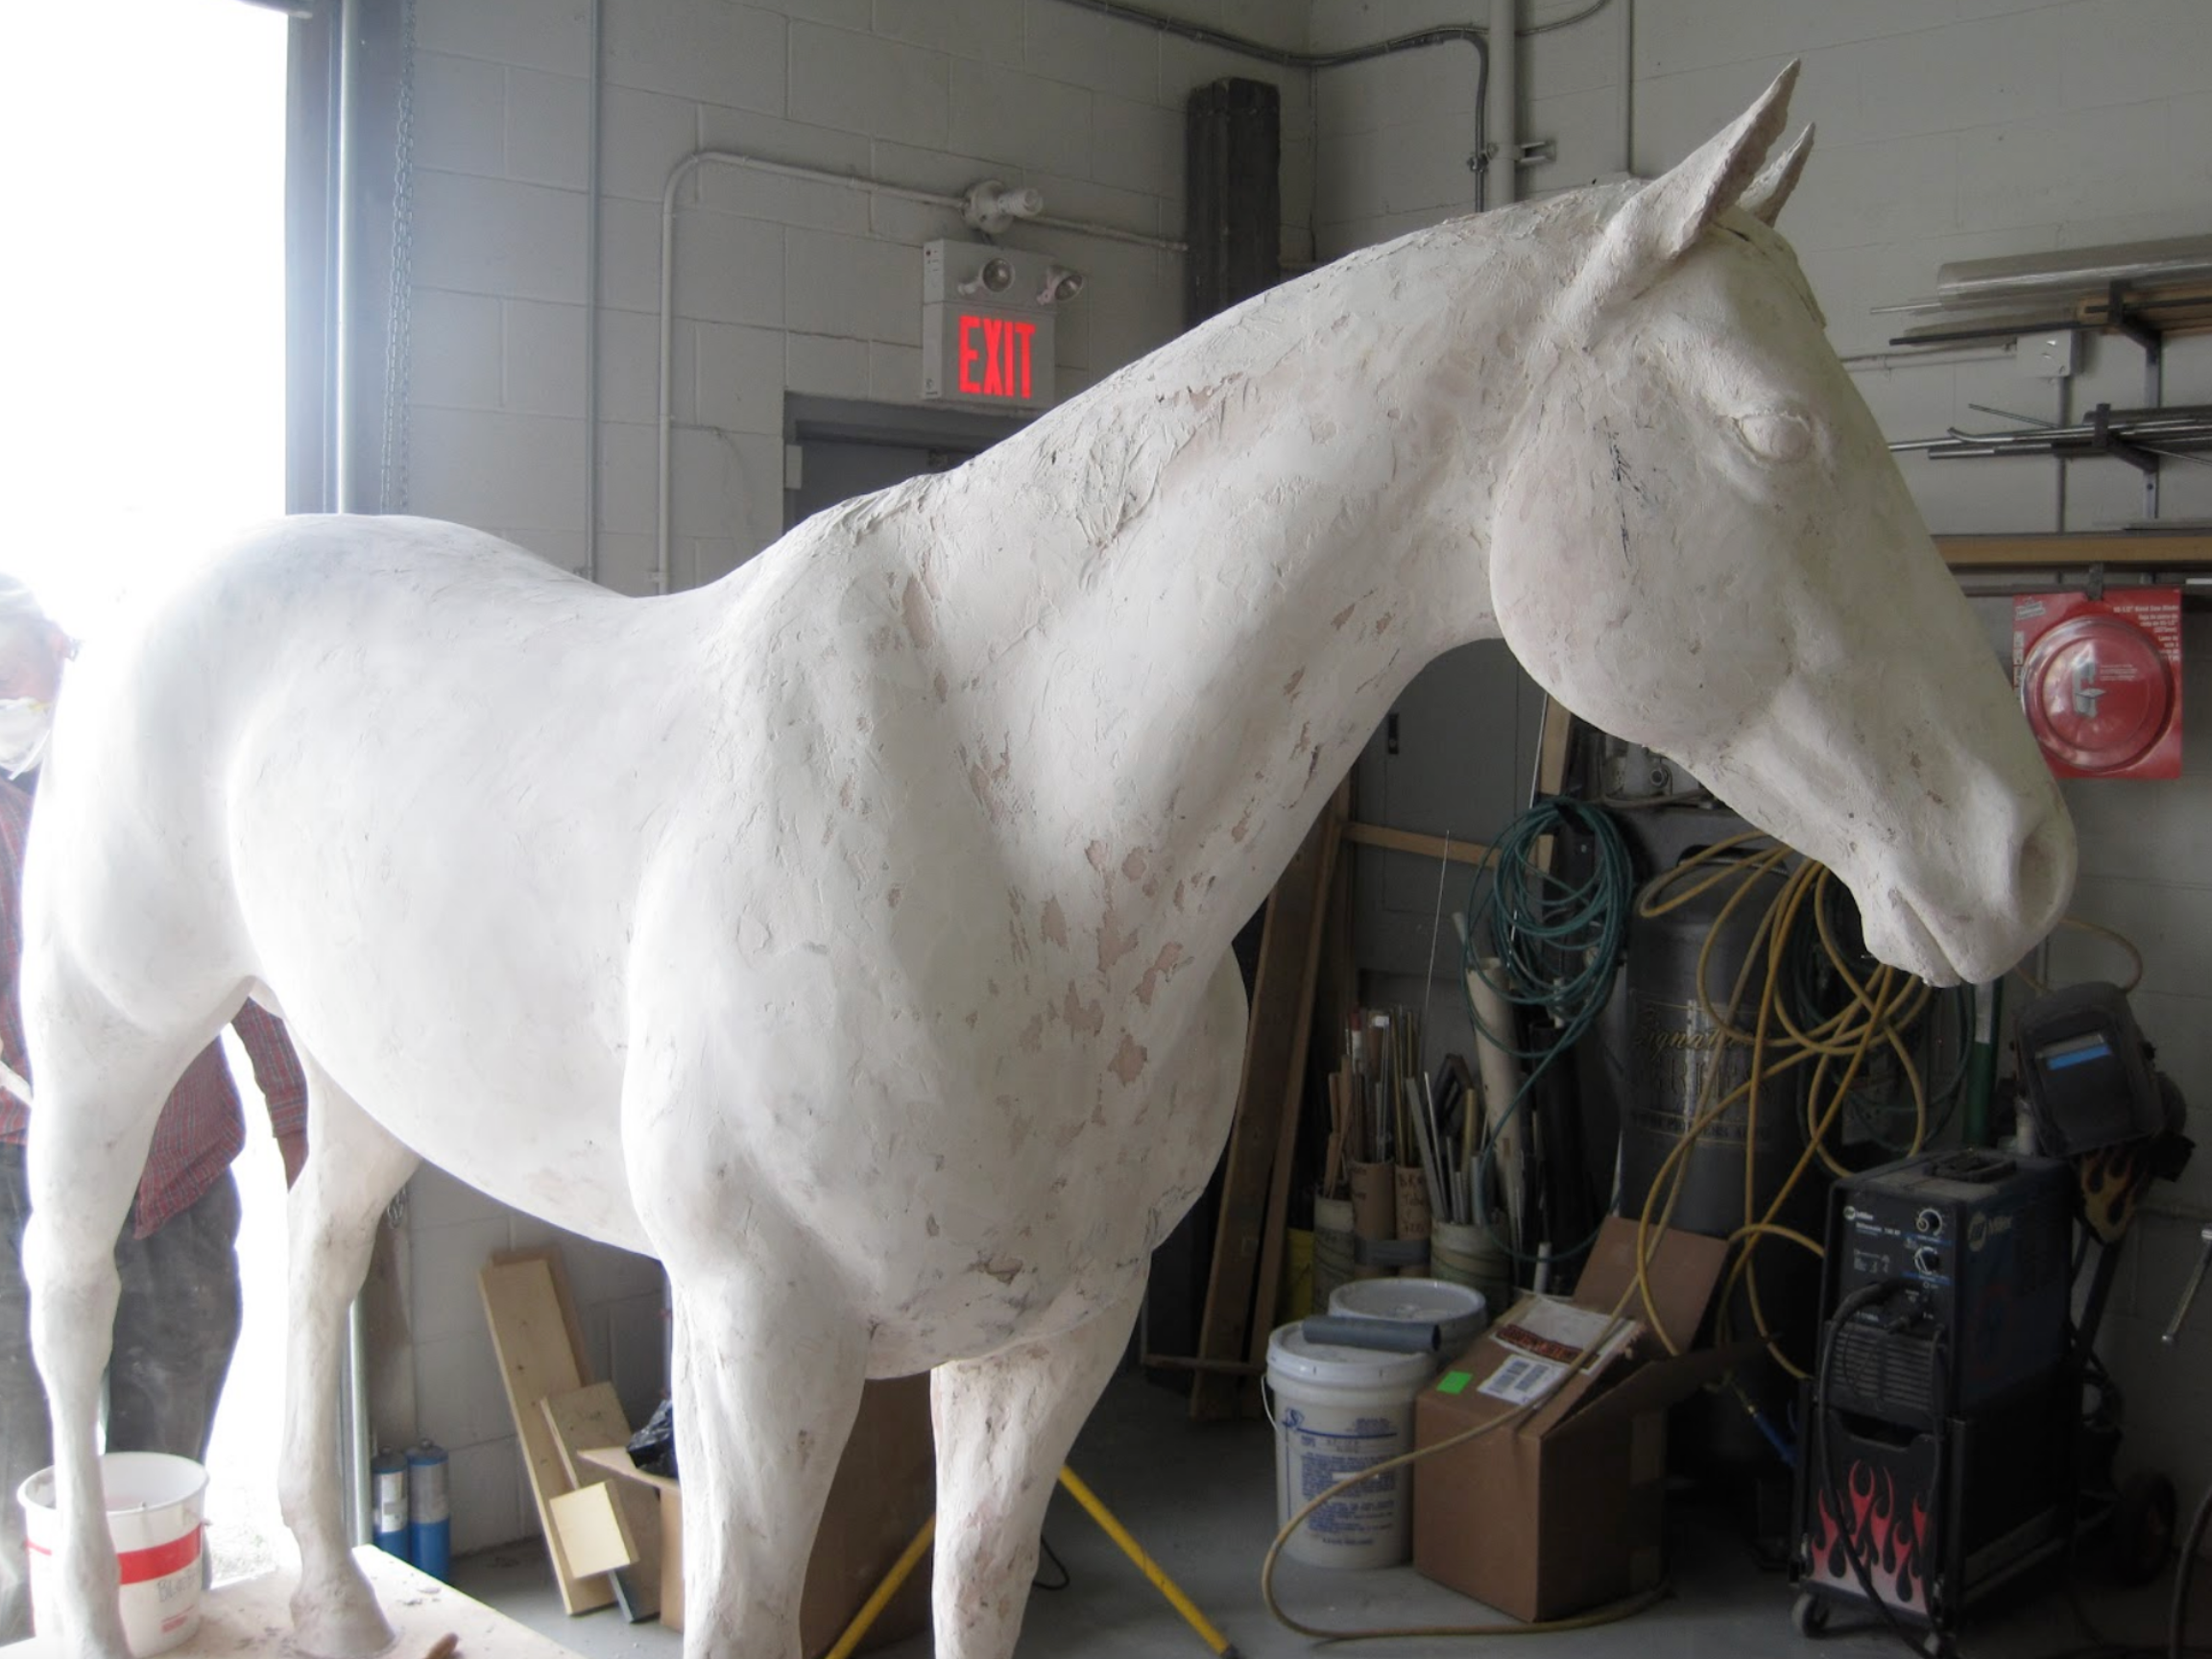  &nbsp;Our new Quarter Horse model takes shape. &nbsp;This will be the basis for our equine colic simulator as well as our equine venipuncture simulator. &nbsp;By creating our own model we are able to ensure the quality of the finished fiberglass ins